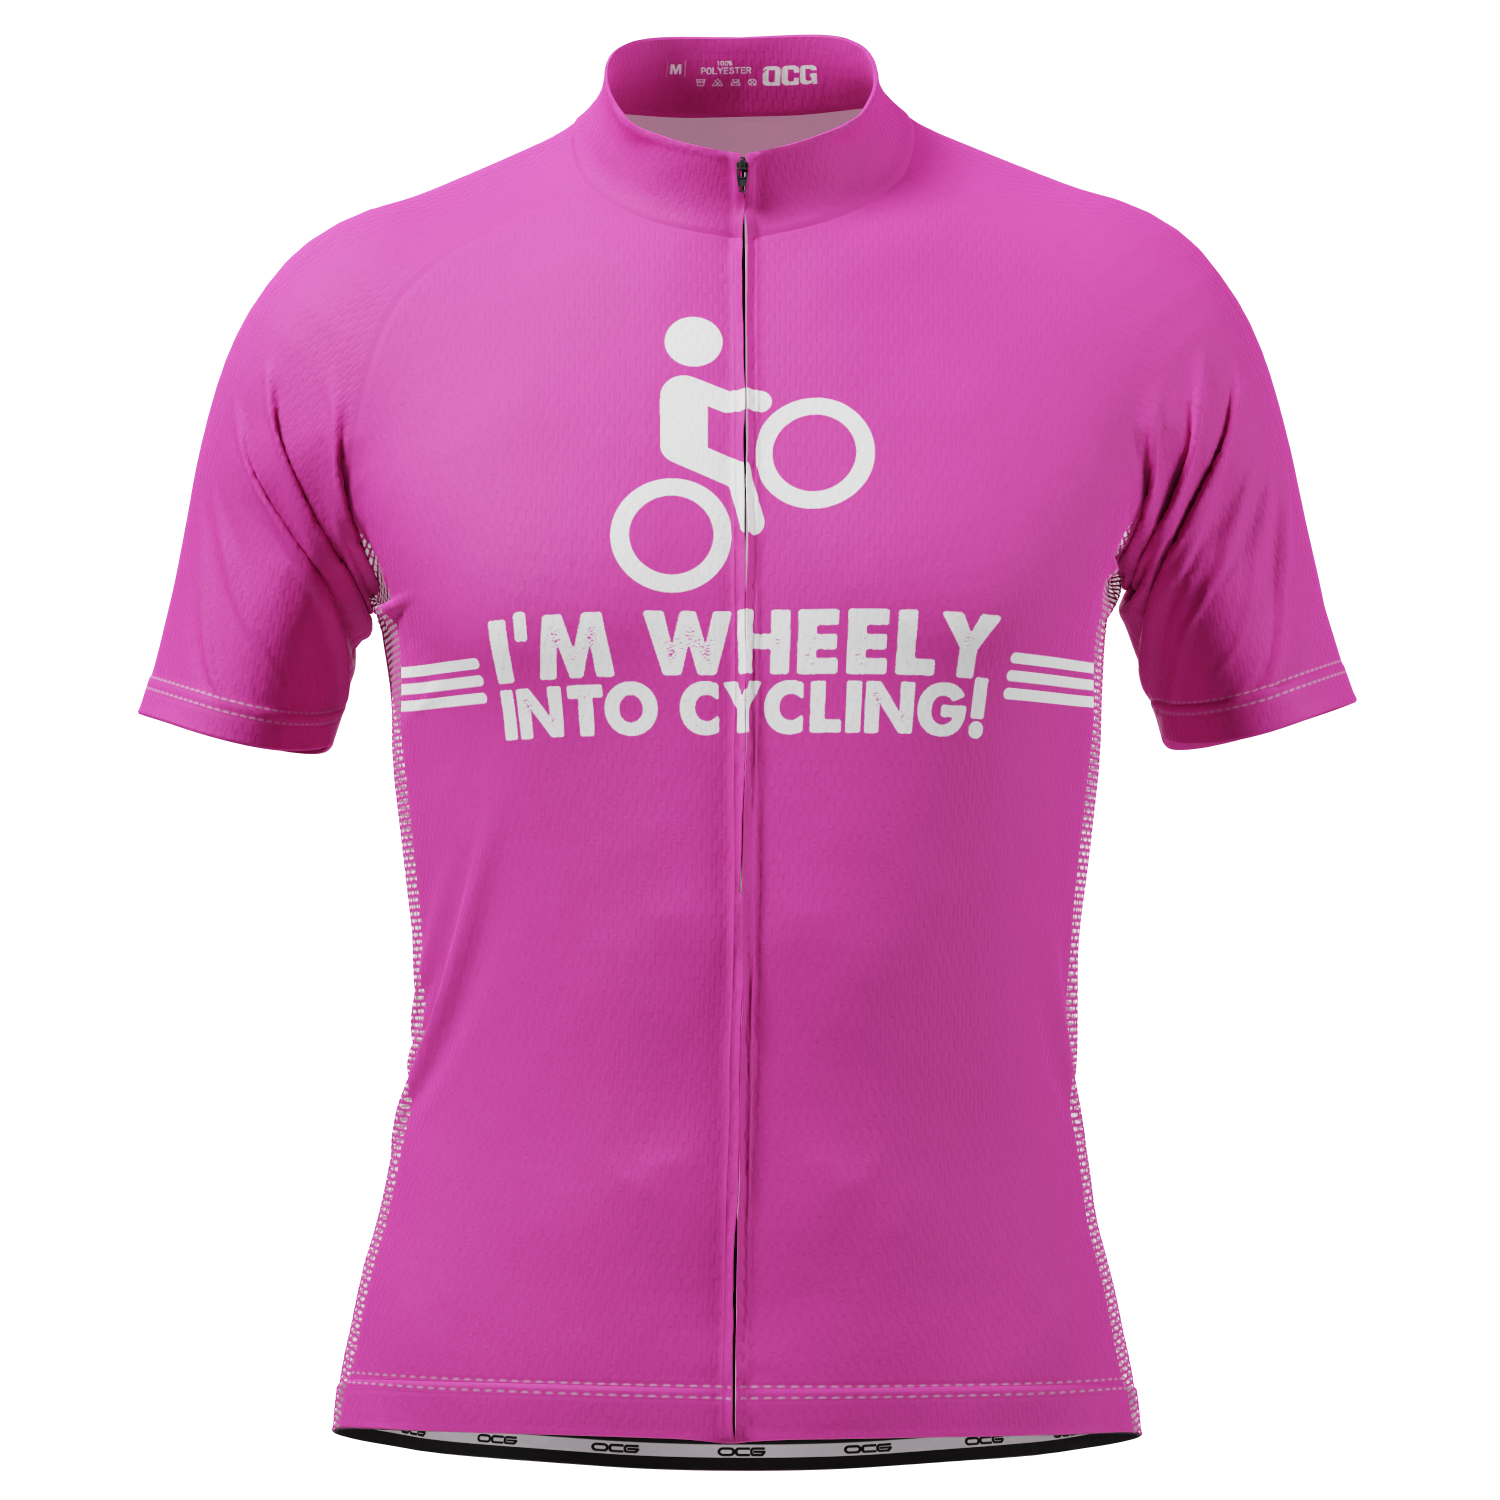 Men's I'm Wheely Into Cycling! Short Sleeve Cycling Jersey